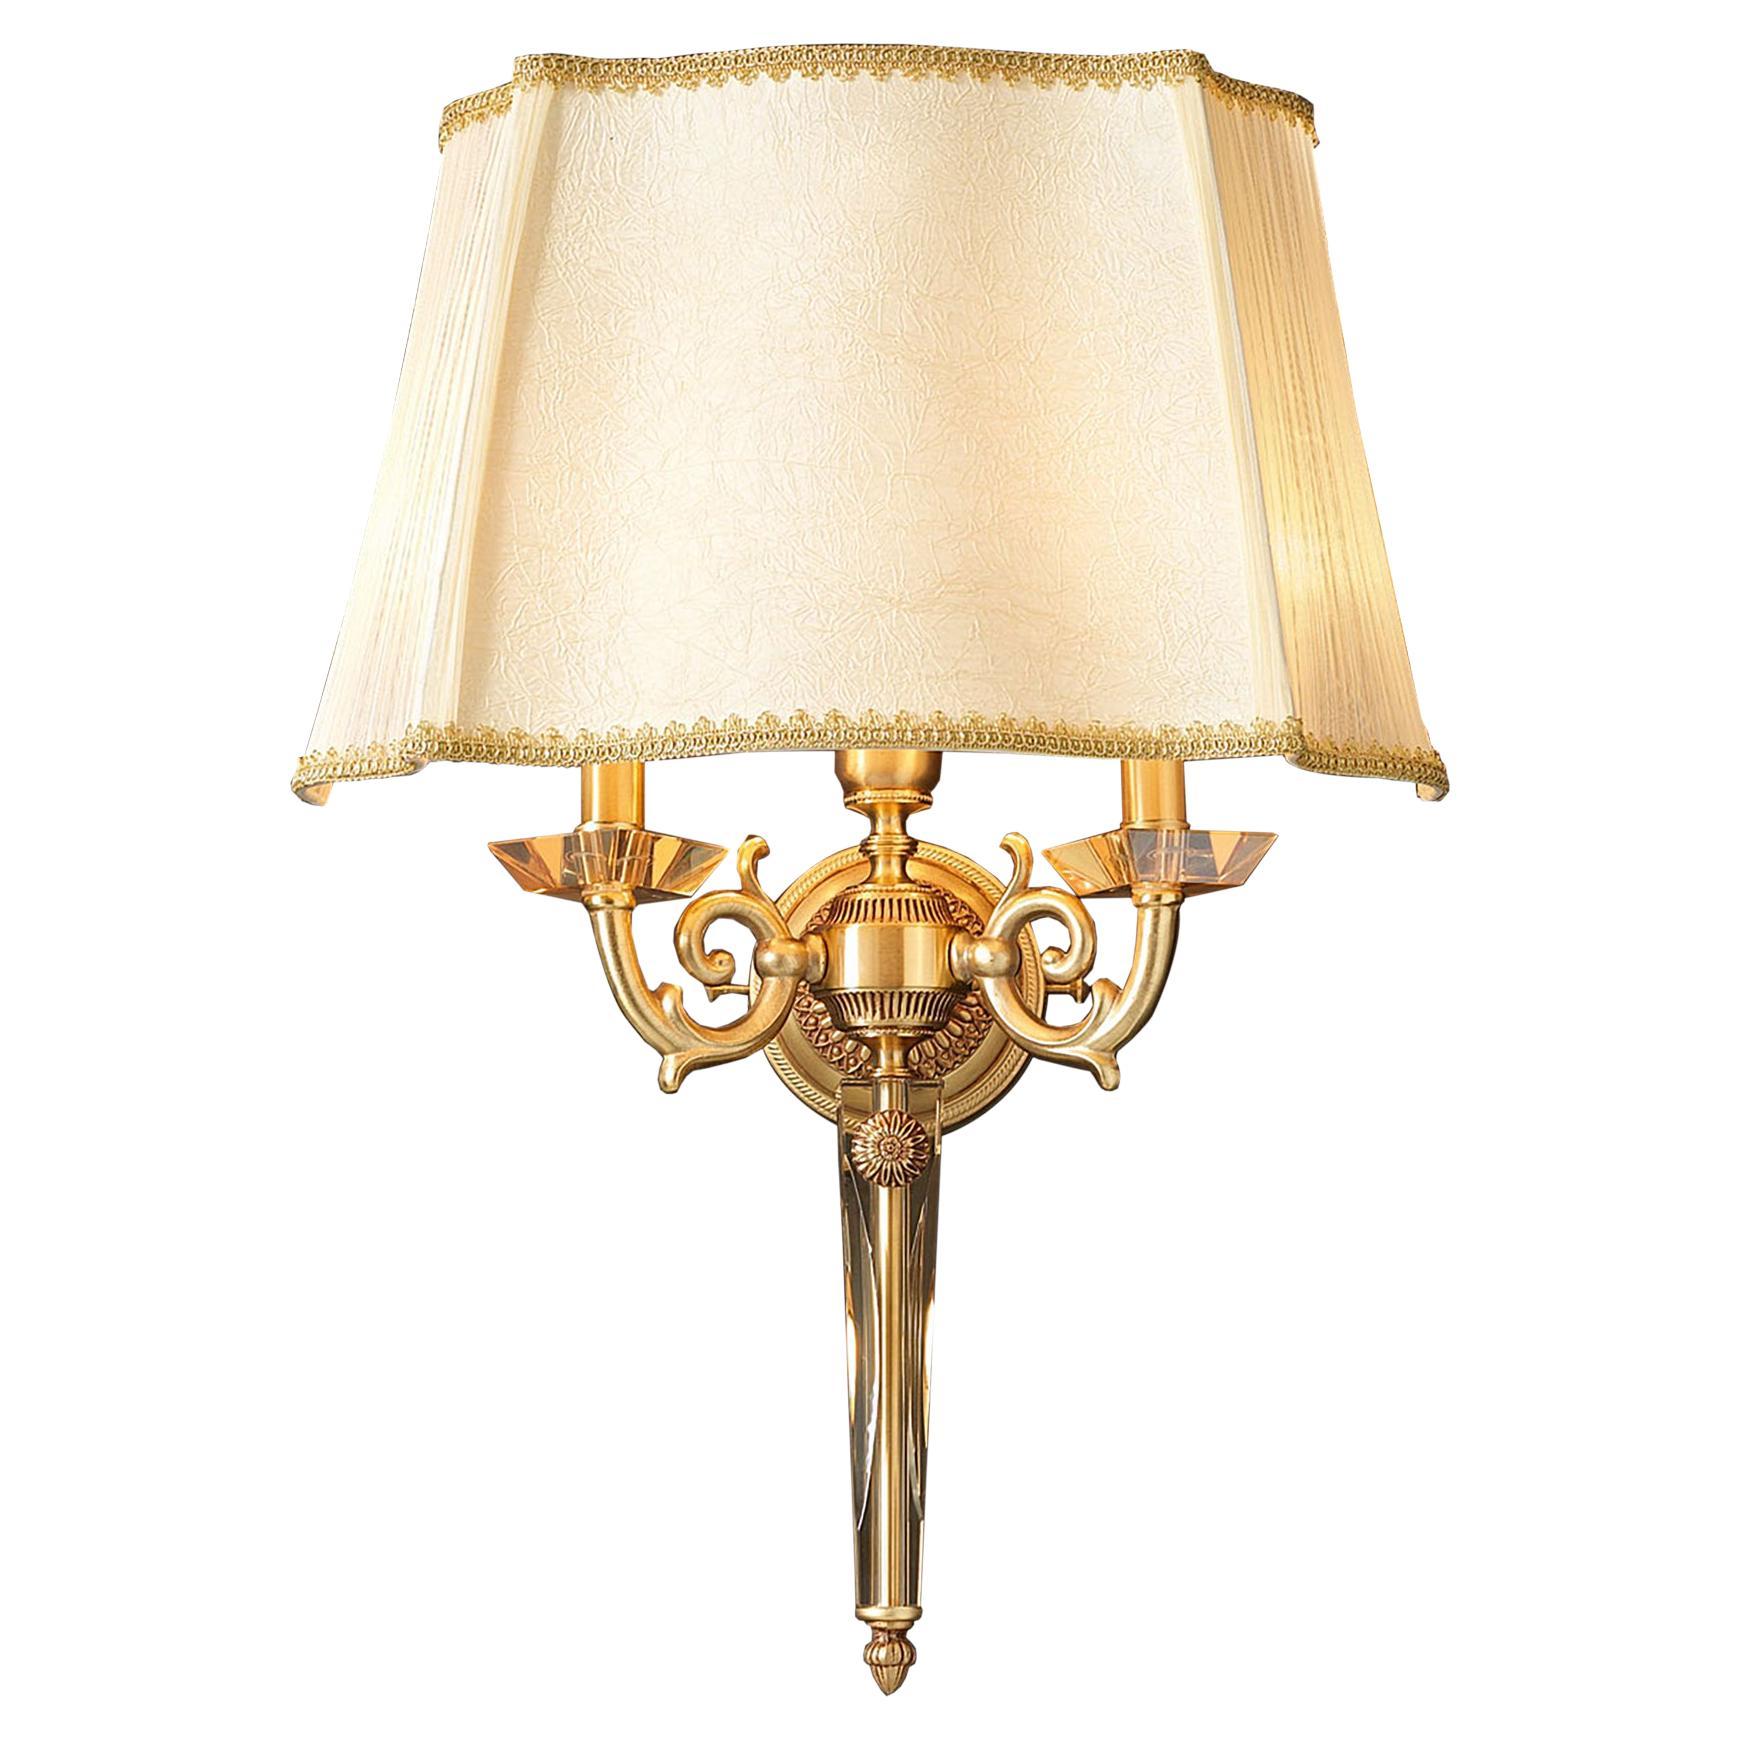 French Renaissance 3 Lights Wall Lamp with Gold Finishing Brass and Fine Shade For Sale